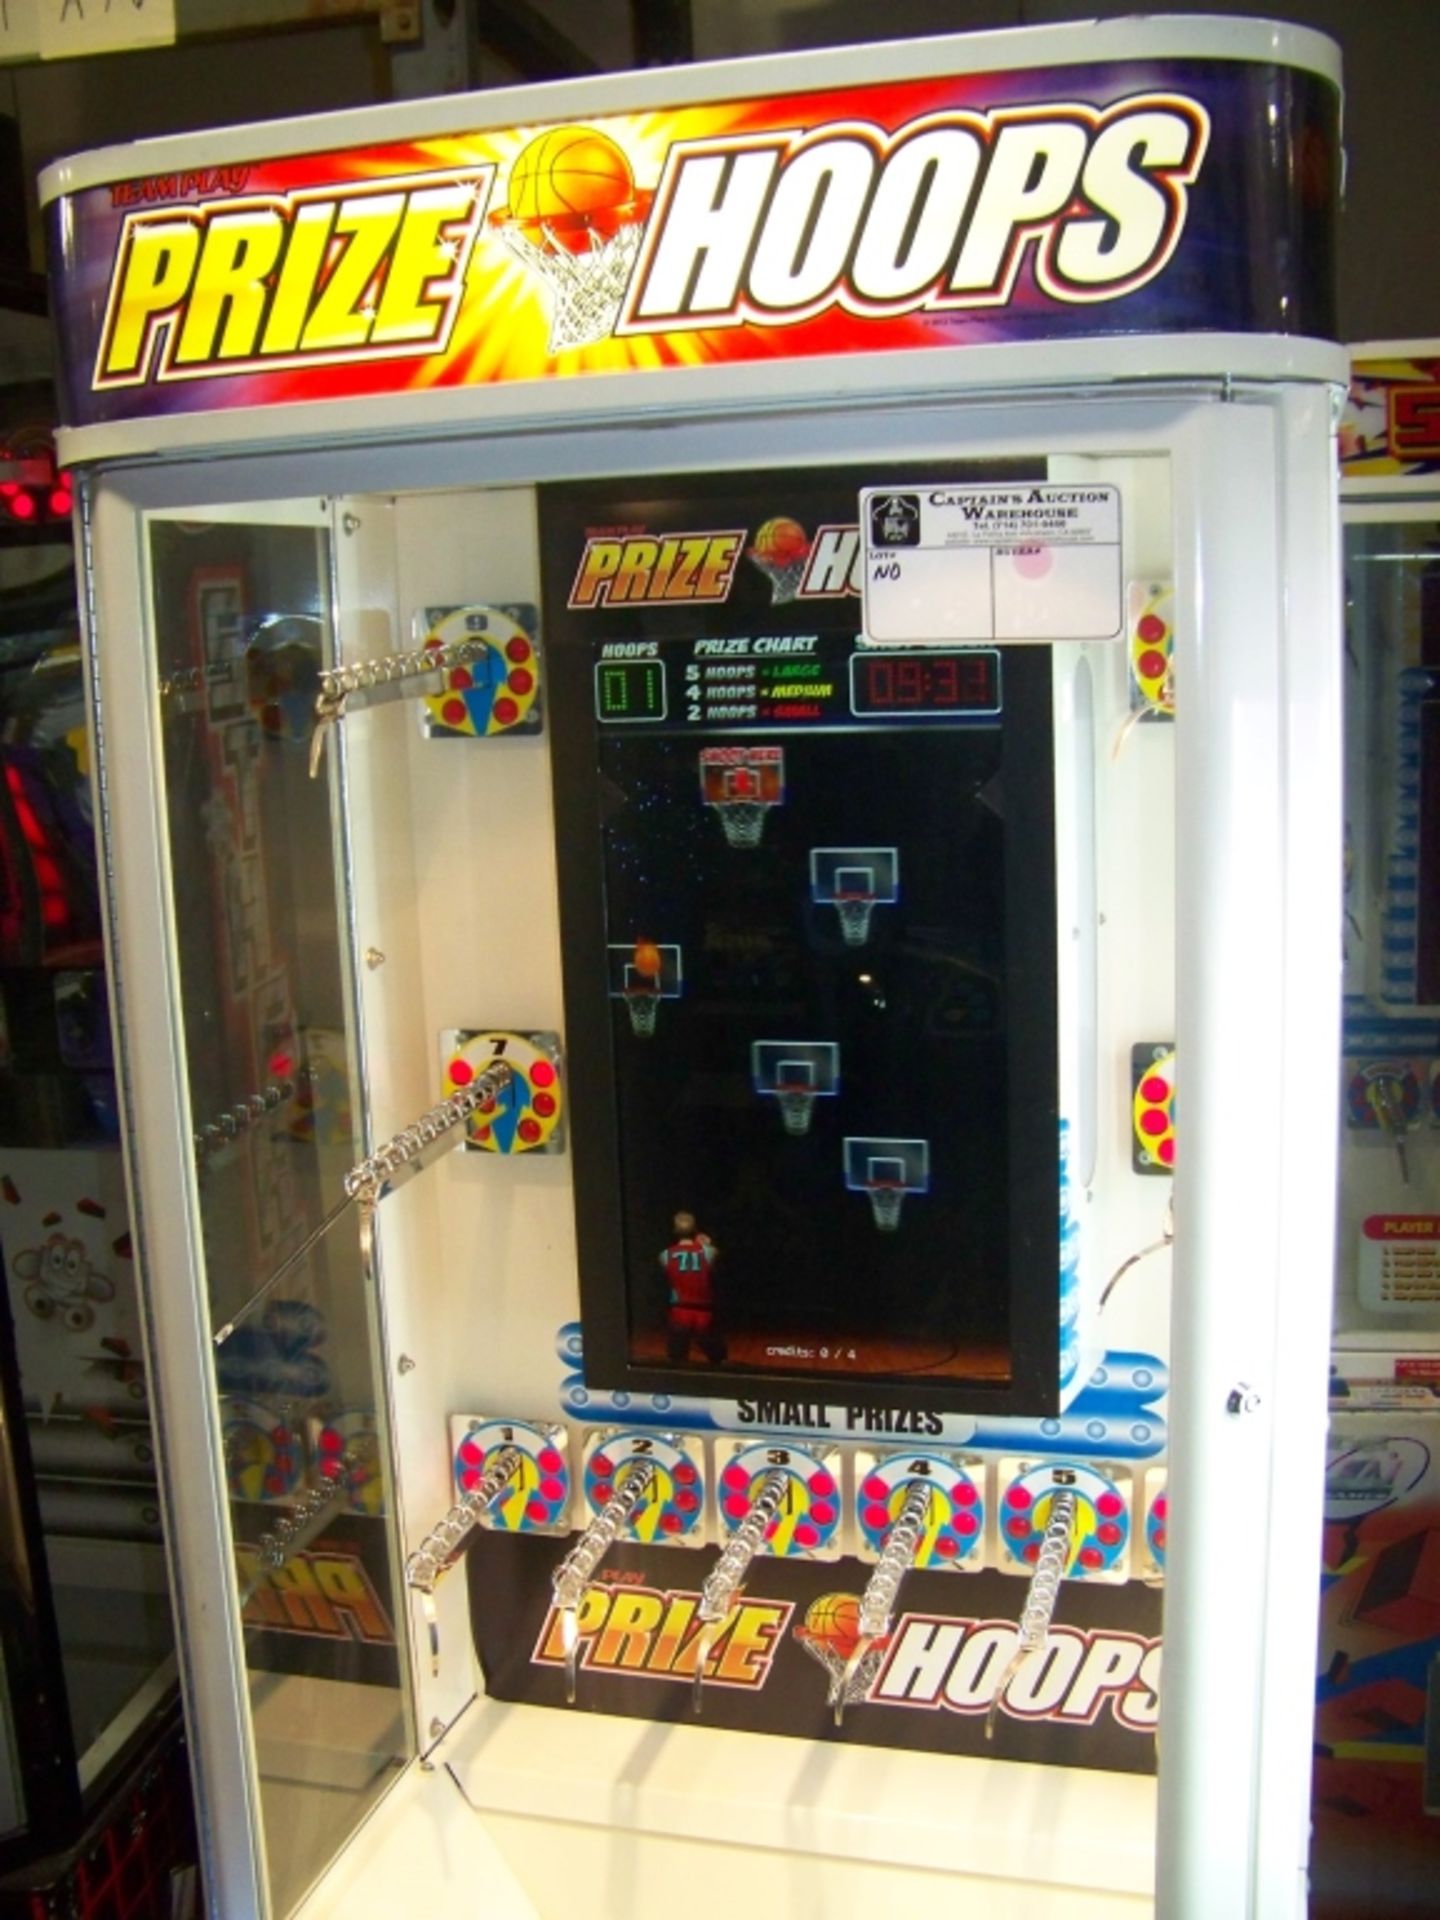 PRIZE HOOPS LCD PRIZE REDEMPTION GAME STACKER KIT - Image 2 of 3